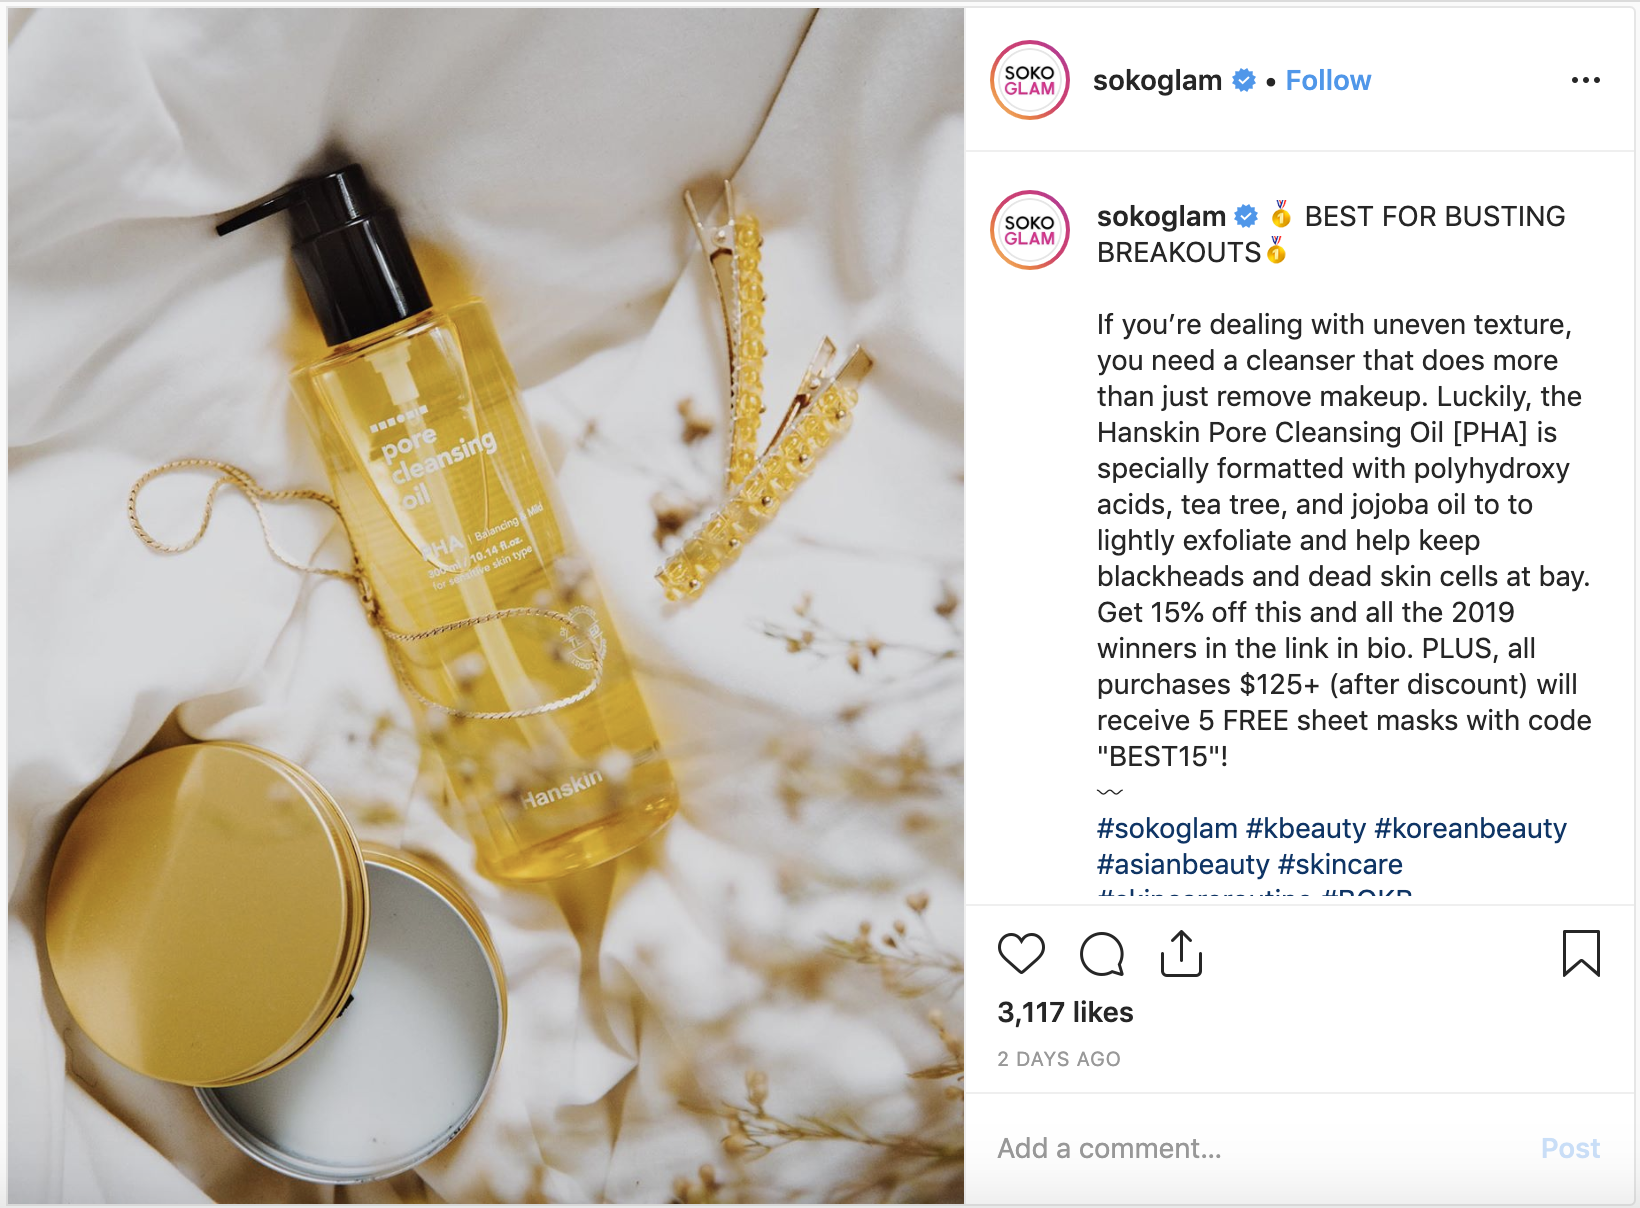 Long Instagram captions are useful to add context about the image, like with educating or storytelling to further engage readers